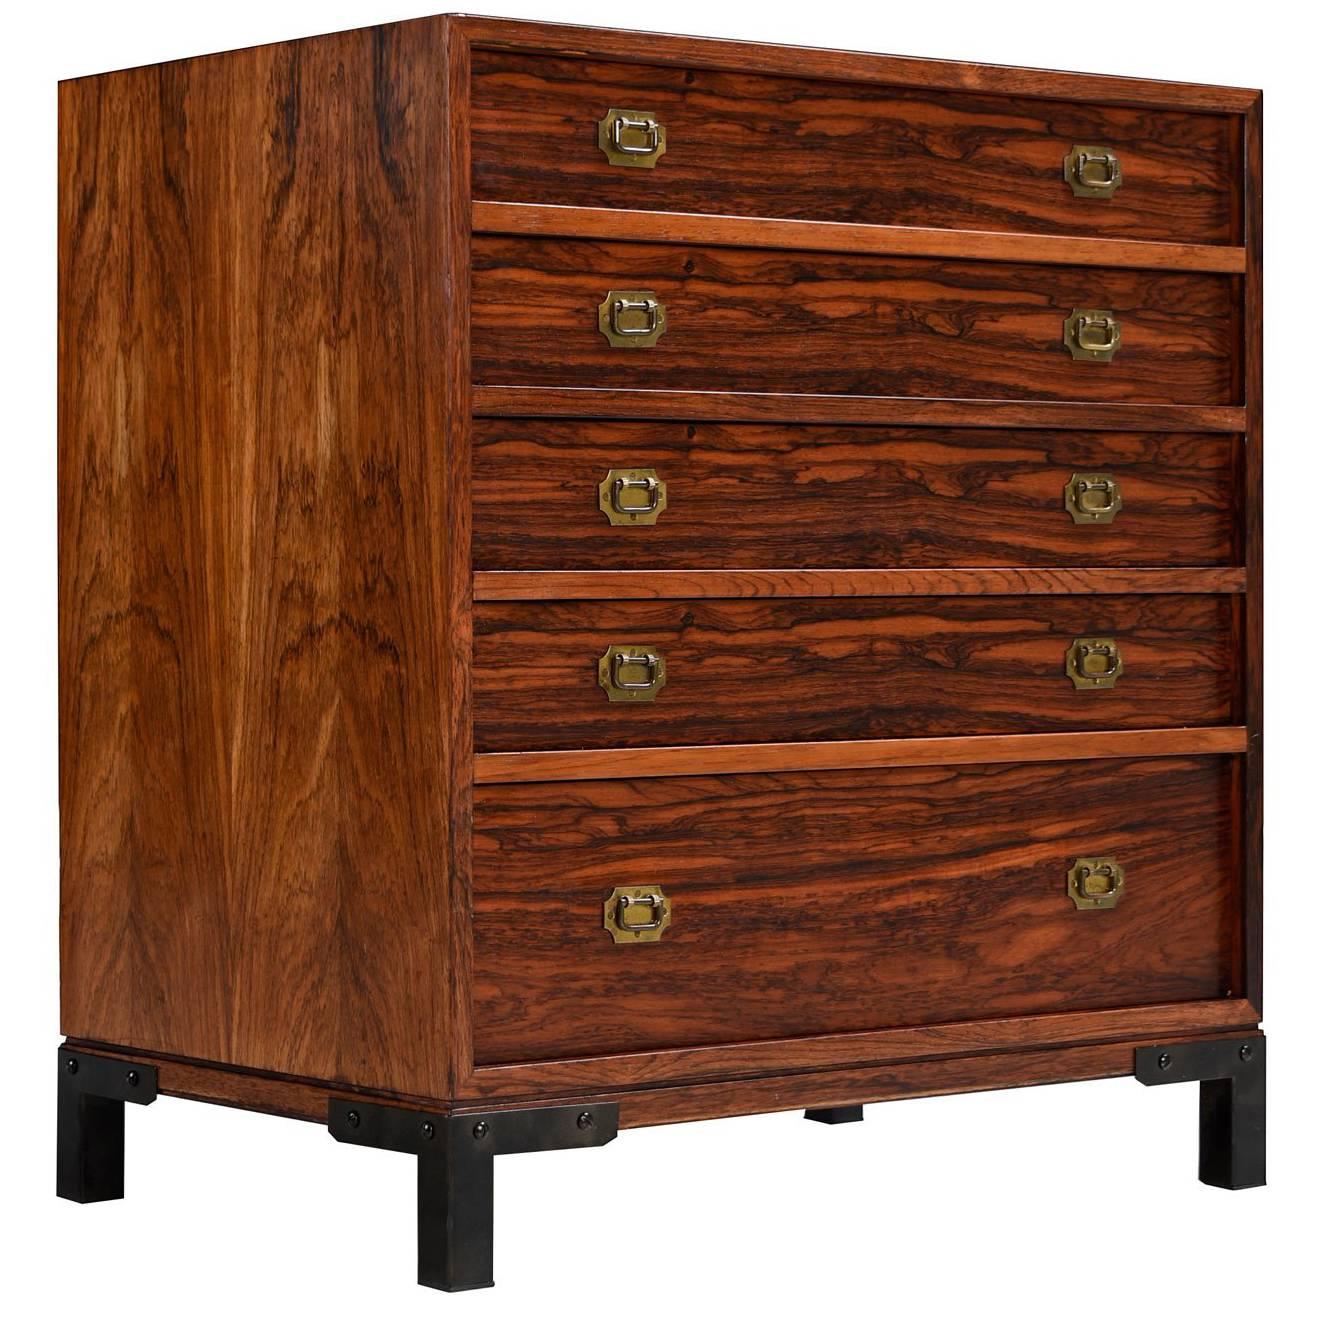 Rosewood and Brass Accent Asian Modern Chest or Commode Dressers